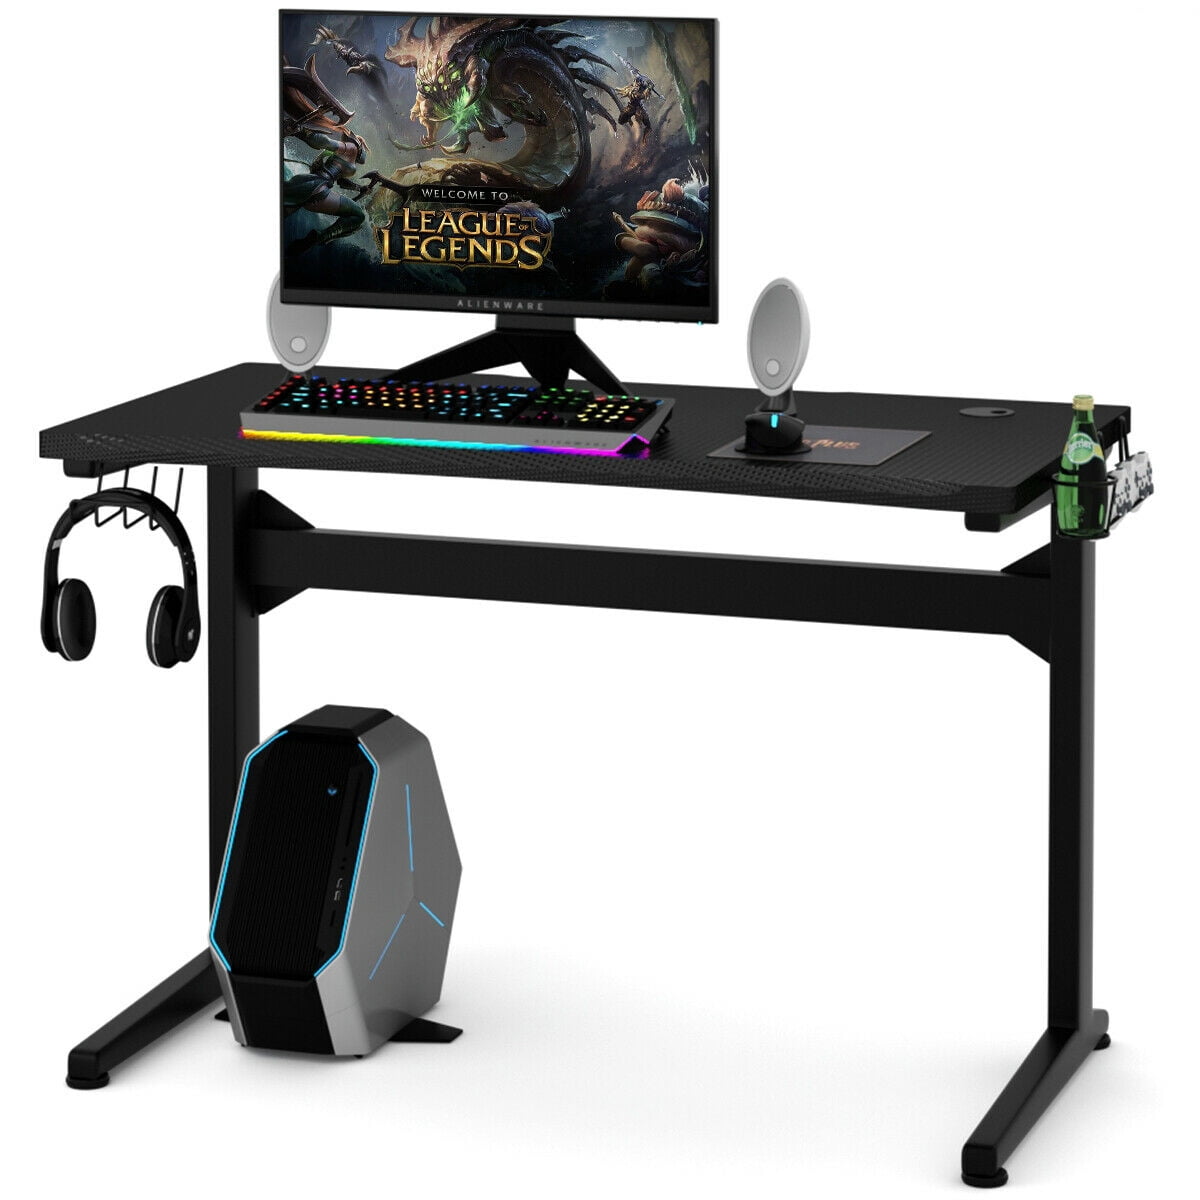 43'' Gaming Desk E-sports Office Computer PC Table Headphone & Cup Holder Black 